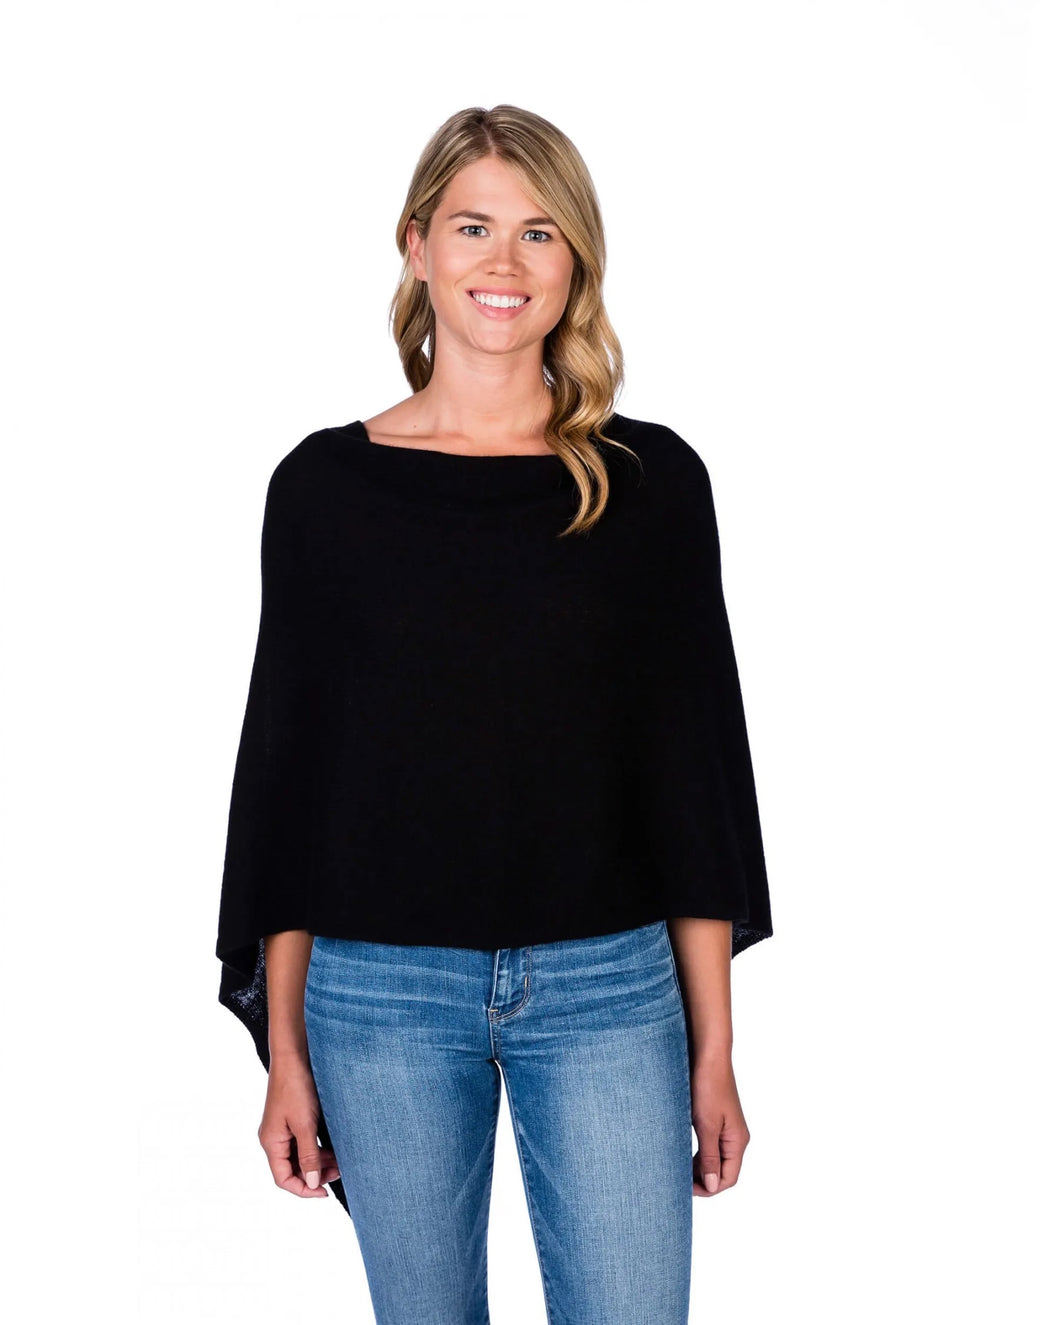 100% Cashmere Dress Topper Poncho by Alashan Cashmere